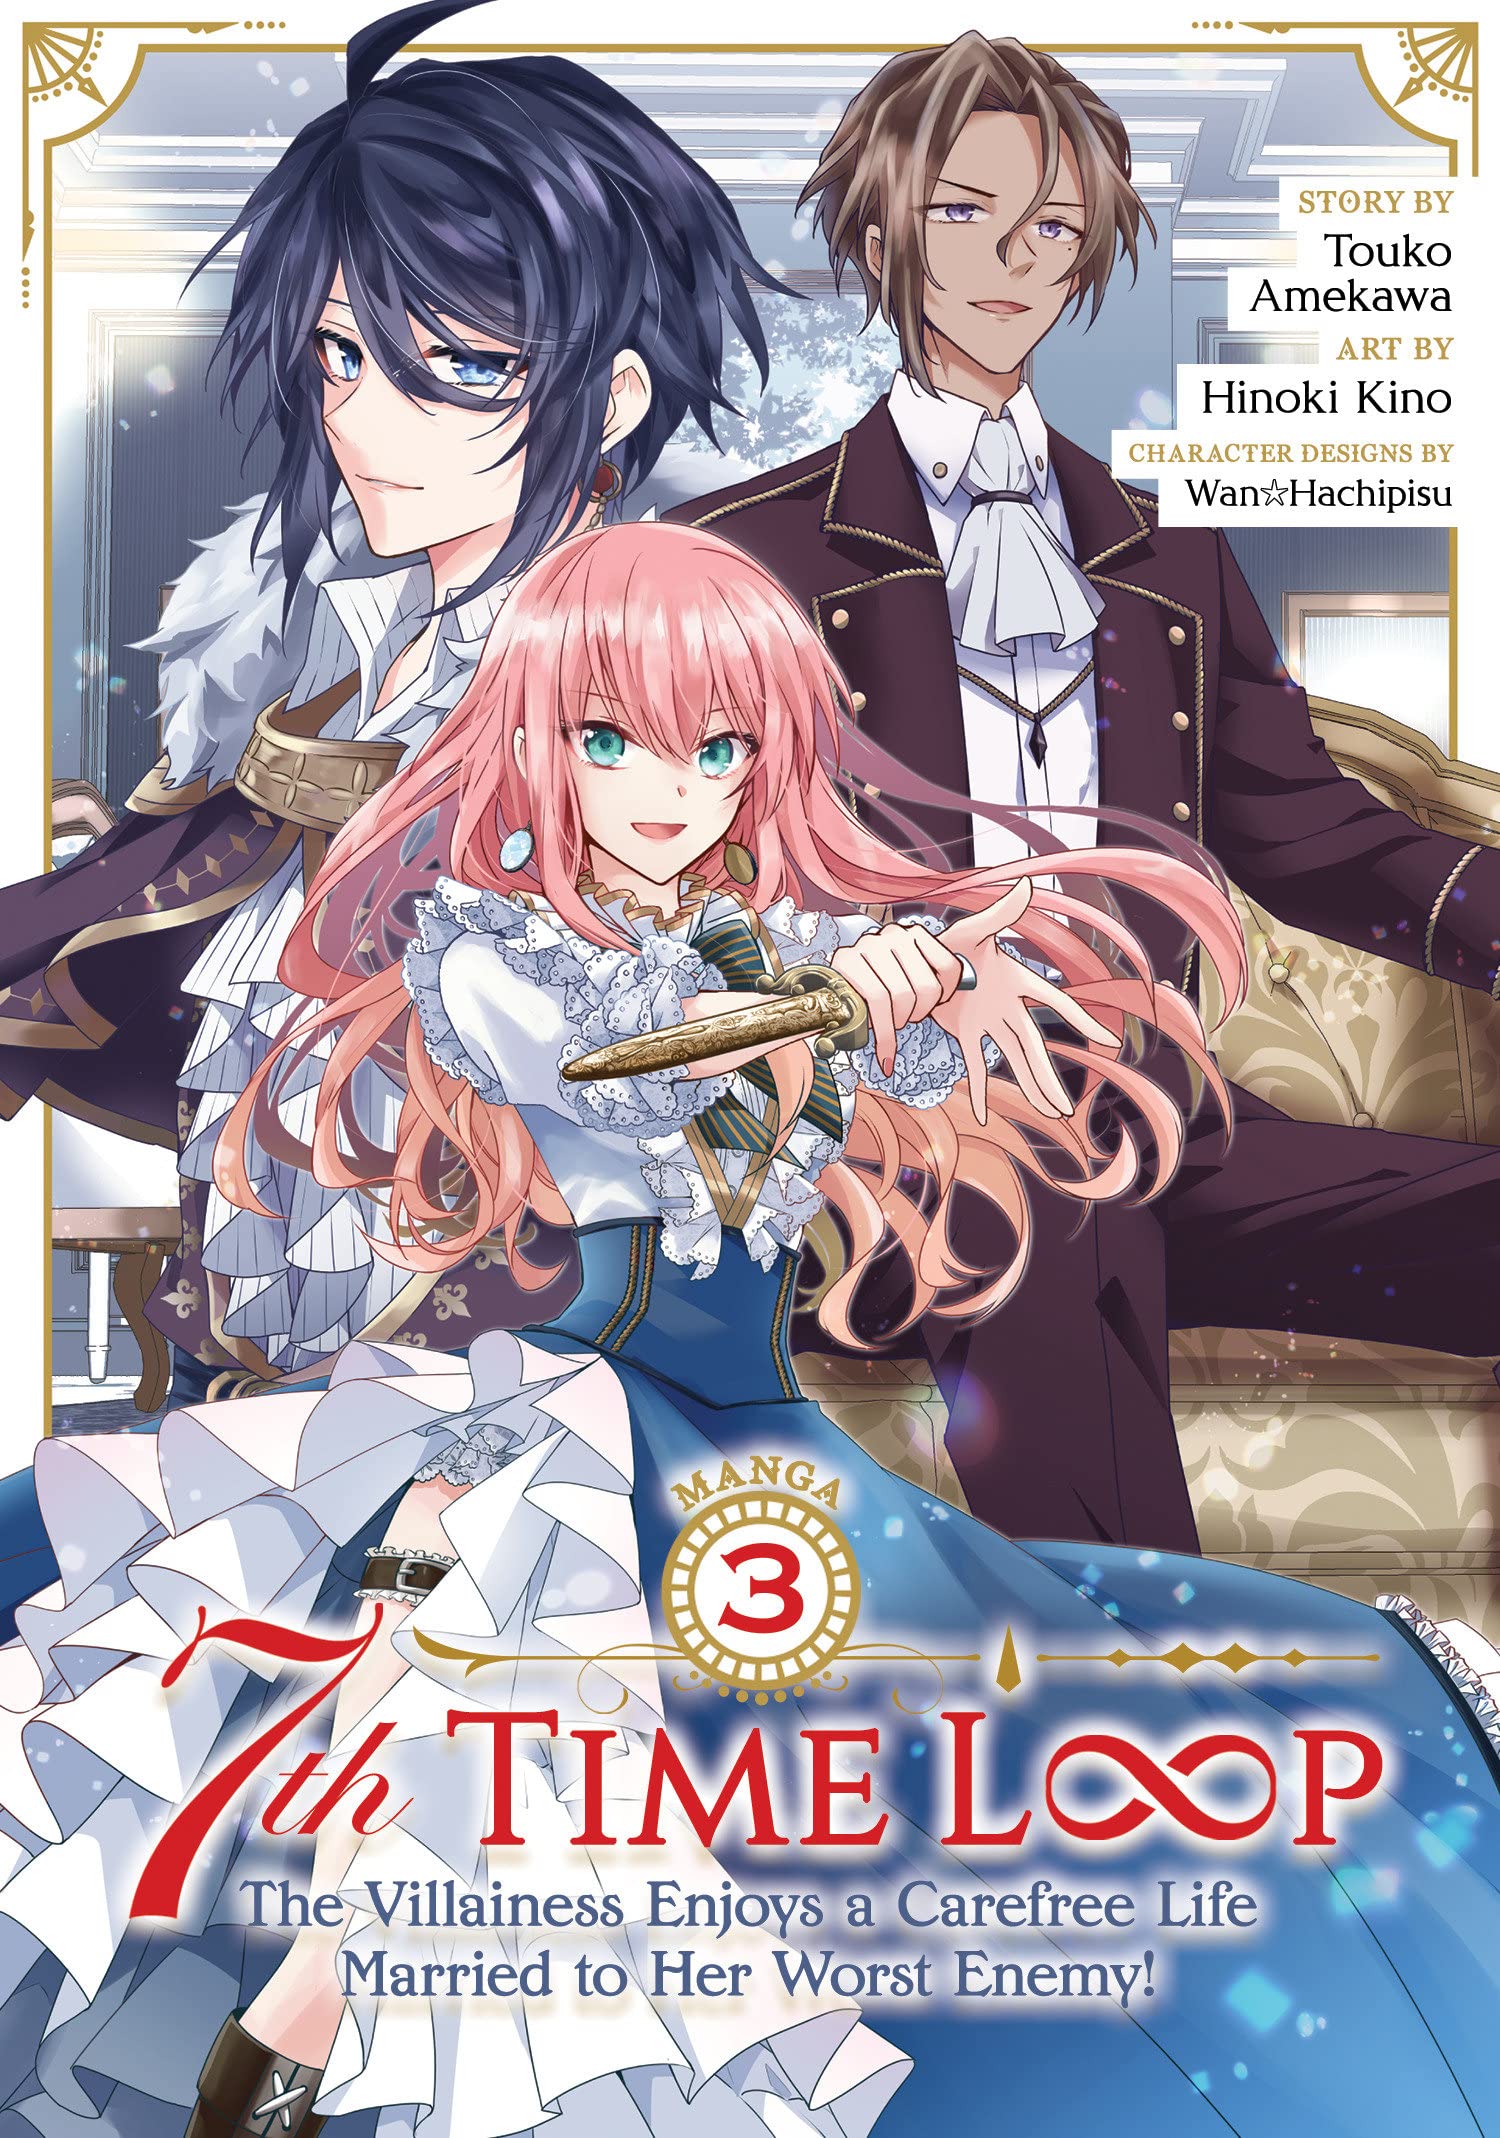 7th Time Loop: The Villainess Enjoys a Carefree Life Married to Her Worst Enemy! (Manga) Vol. 03